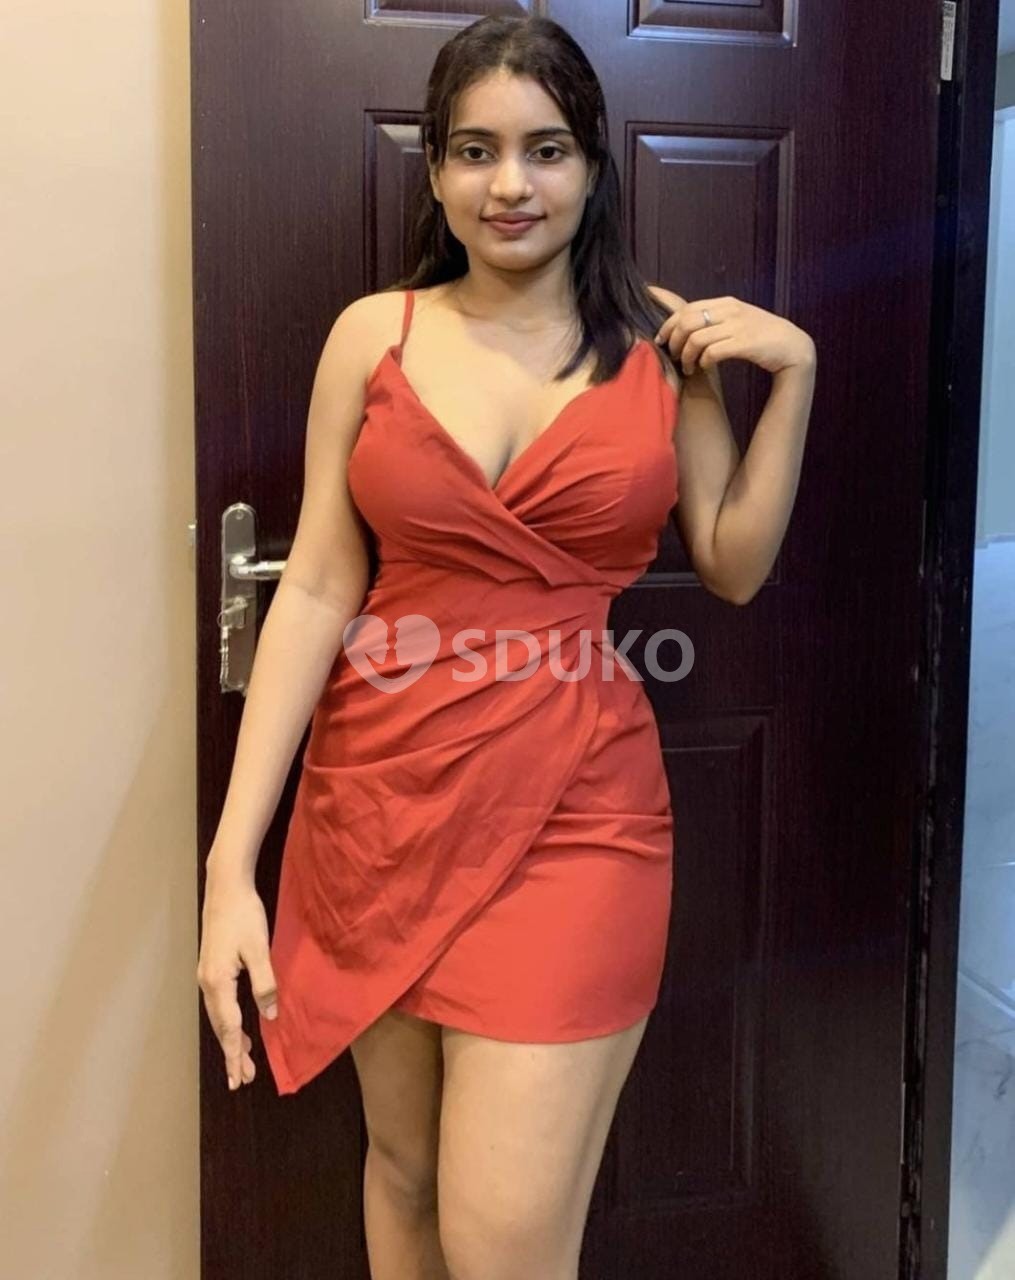 LAJPAT NAGAR ⭐24×7 DOORSTEP 💥💥 INCALL ❤ OUTCALL SERVICE AVAILABLE CALL ME NOW LOW RATE PRIVATE DECENT LOCAL C